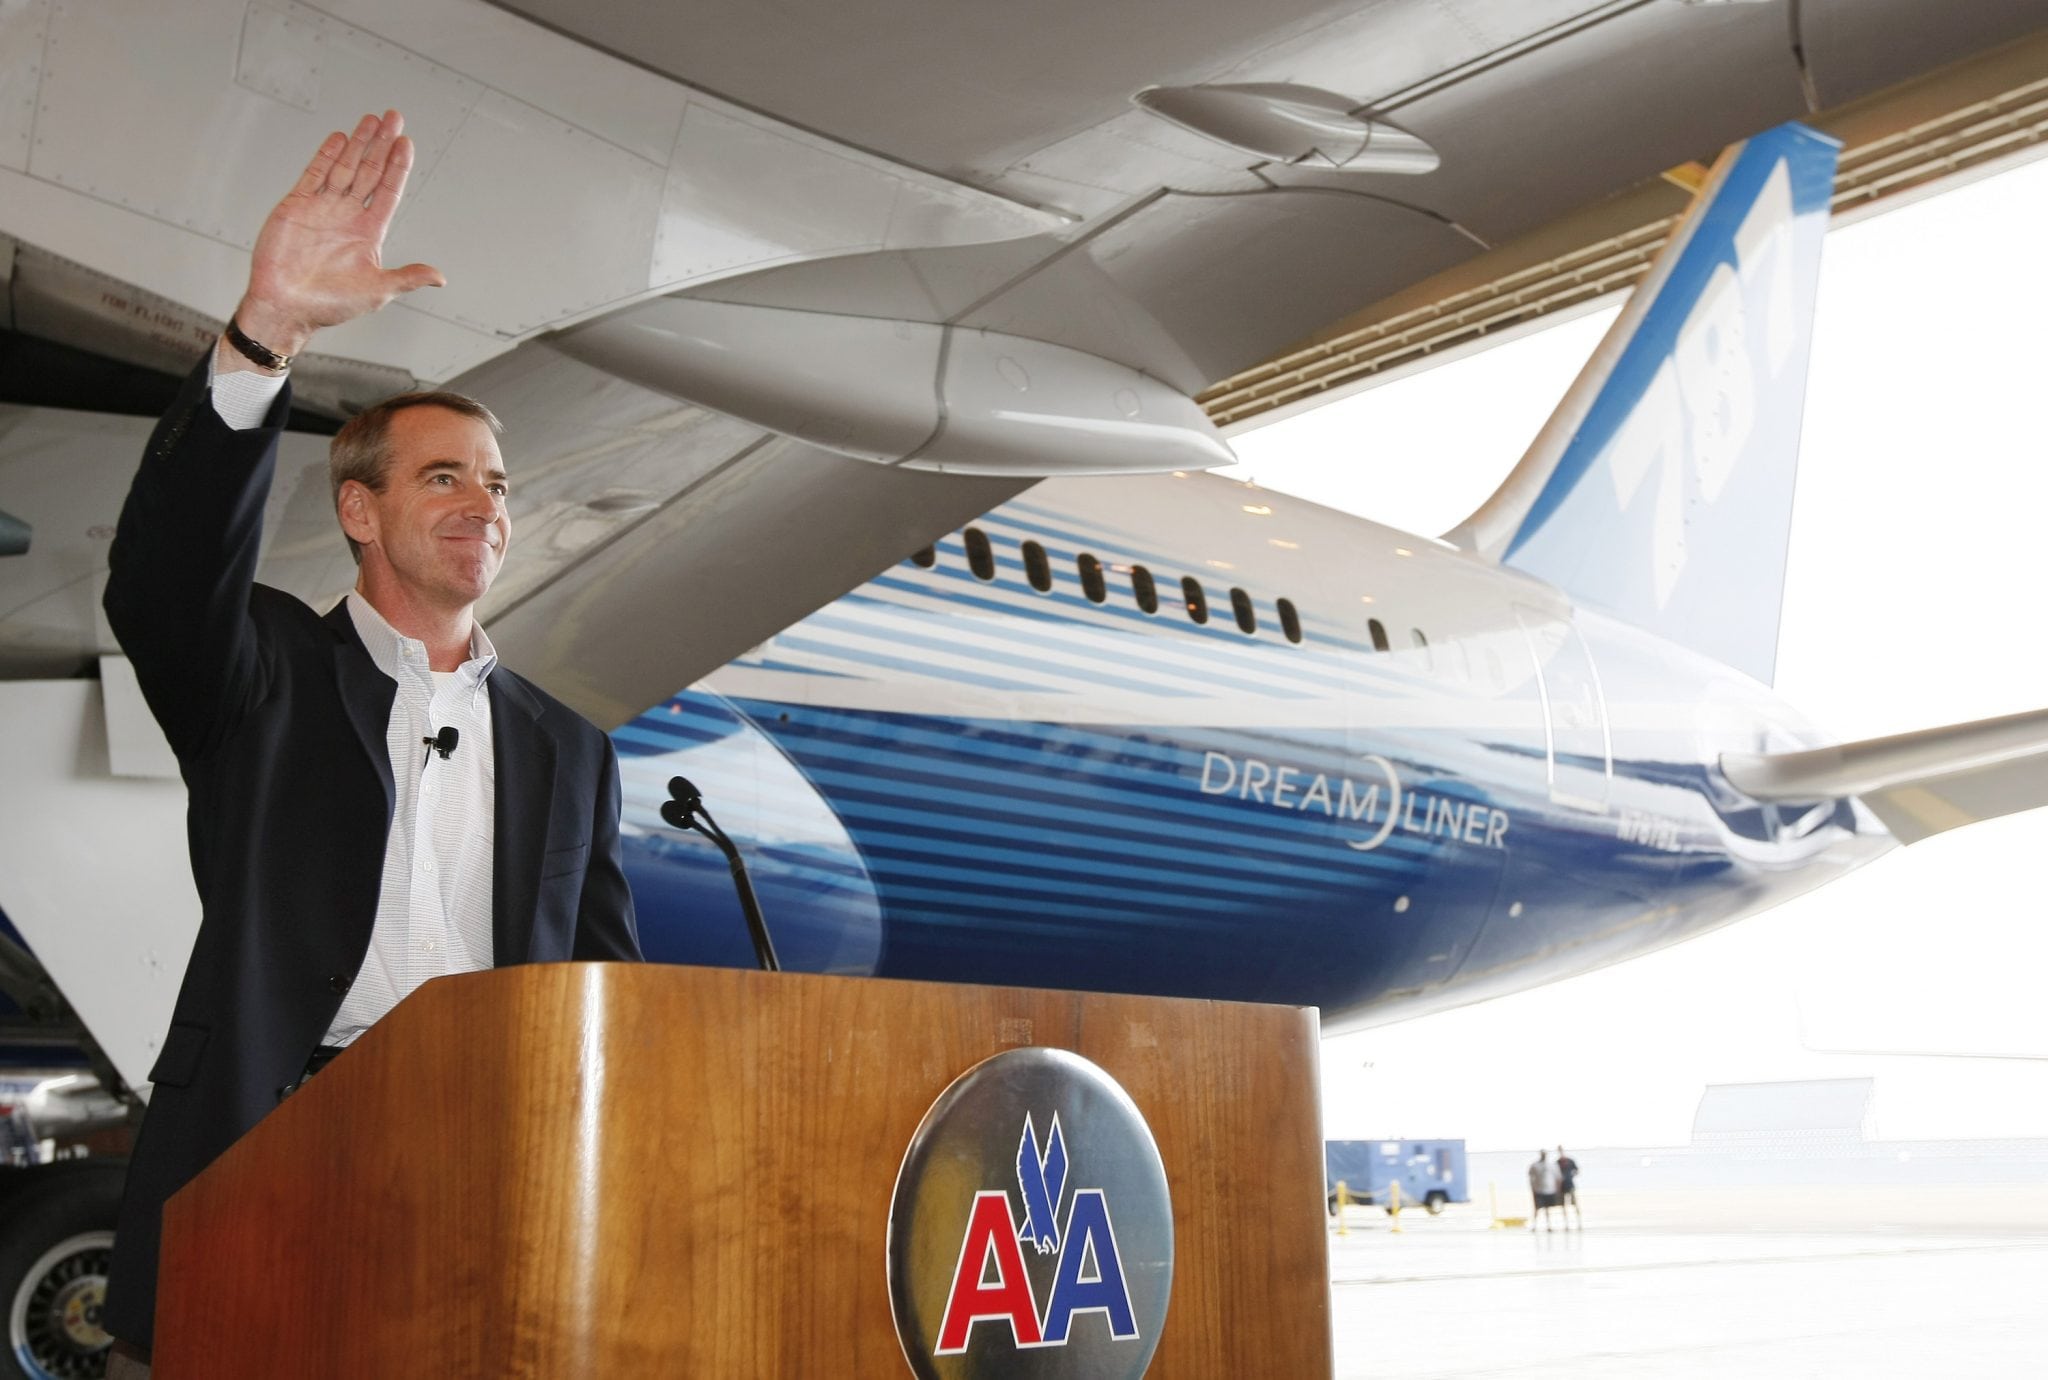 Thomas Horton, Chairman, President and CEO of American Airlines, attends a ceremony for Boeing's new 787 Dreamliner at Dallas-Fort Worth airport in Fort Worth Texas, Friday, May 11, 2012. 